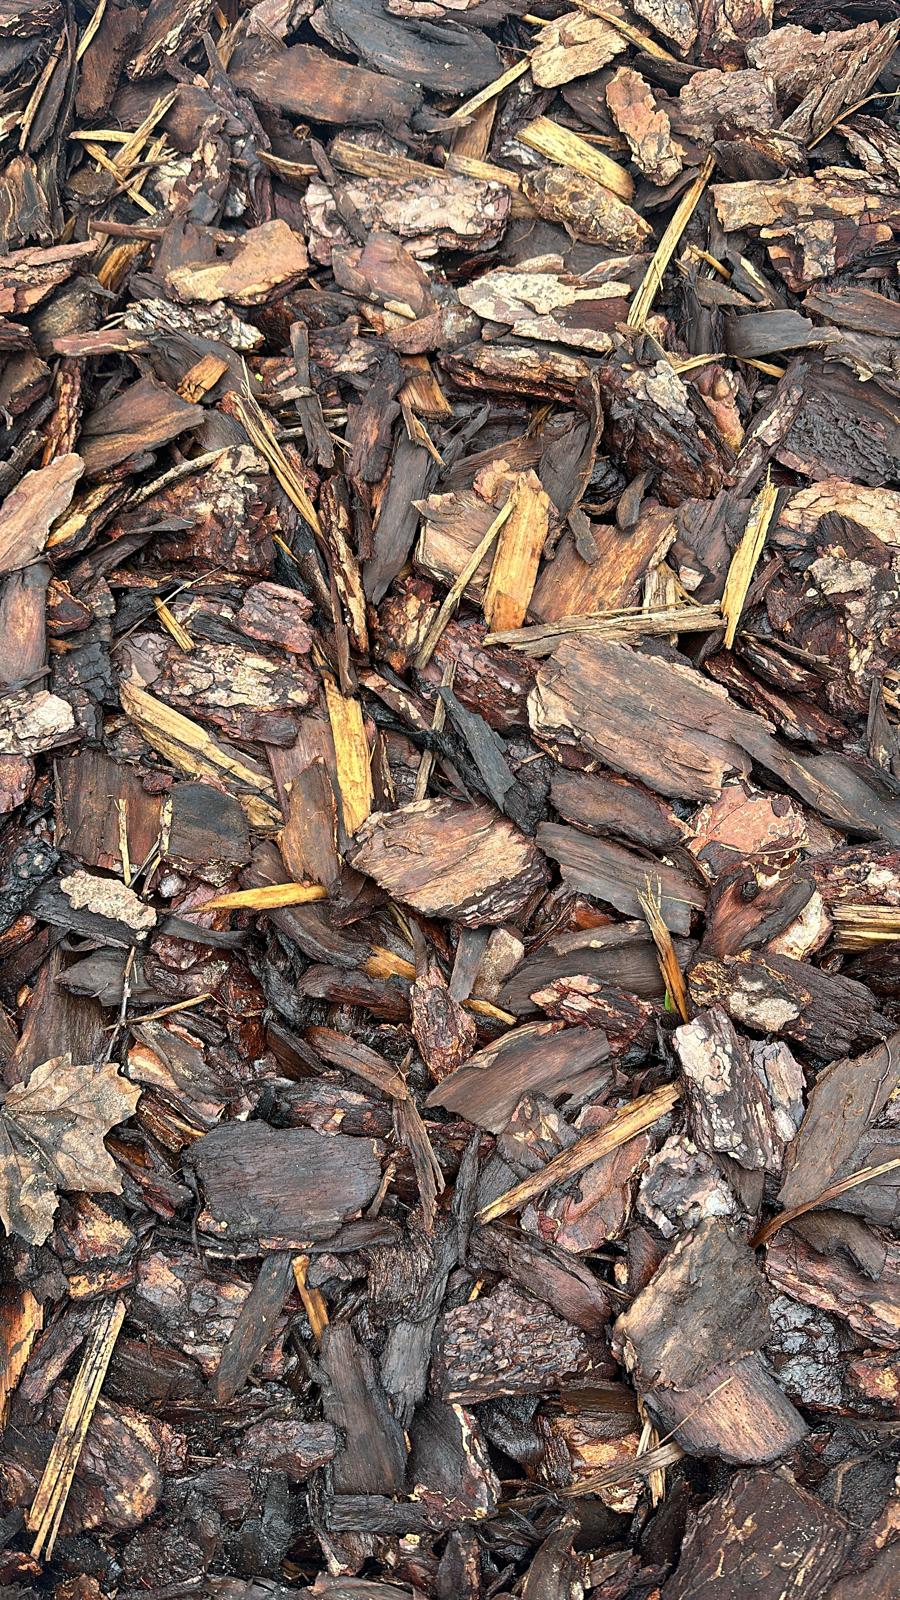 A close up of a pile of wood chips.